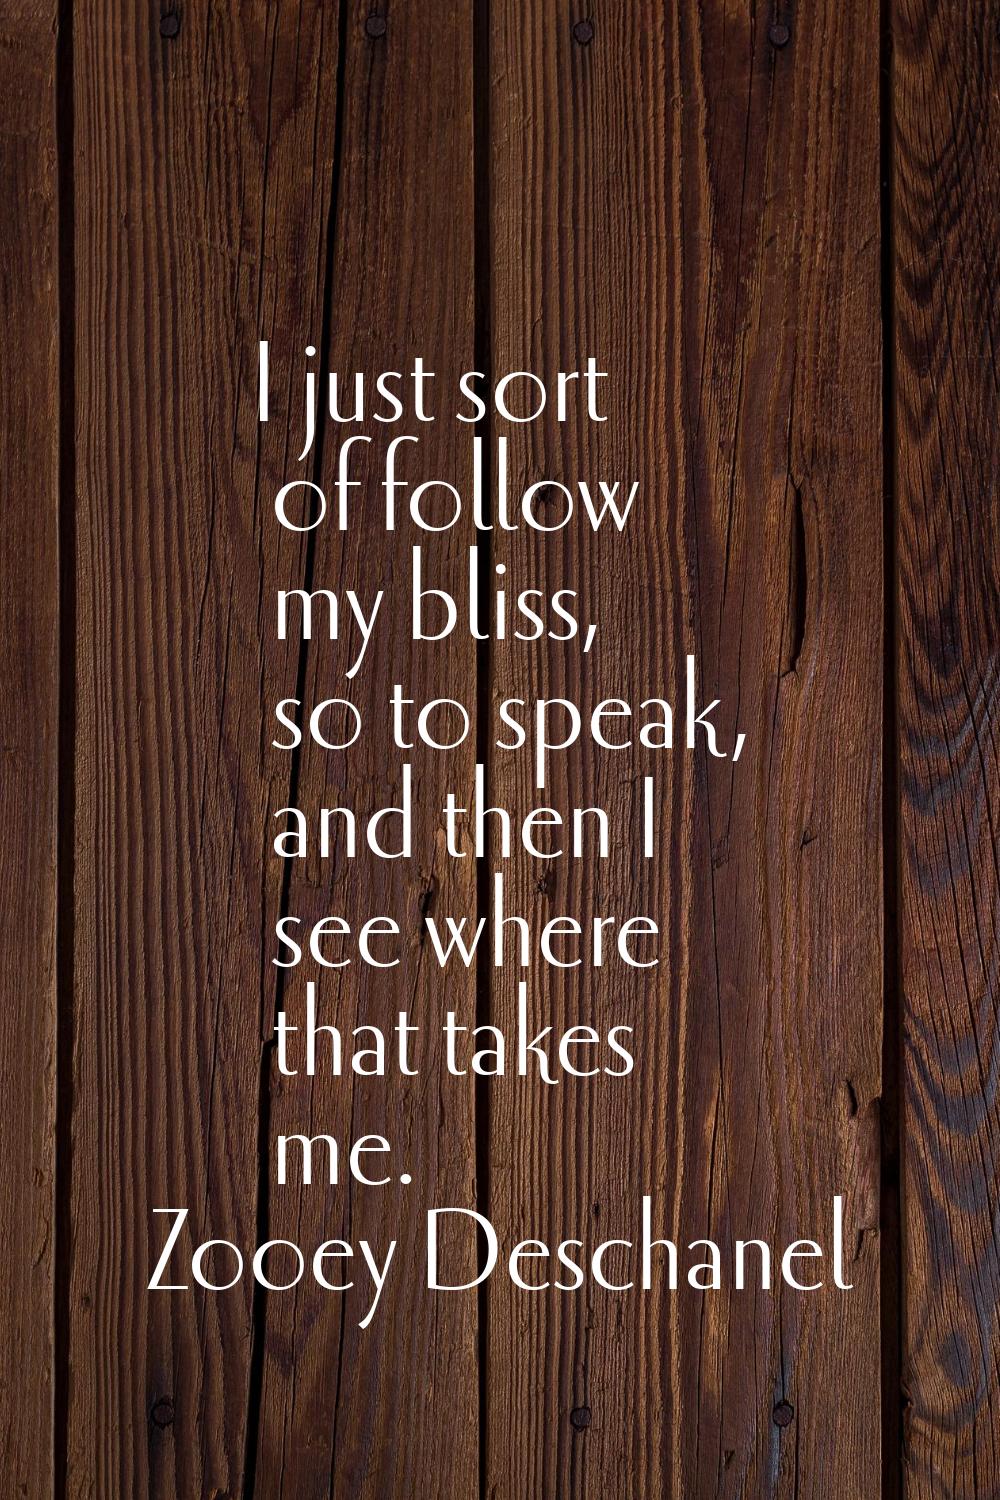 I just sort of follow my bliss, so to speak, and then I see where that takes me.